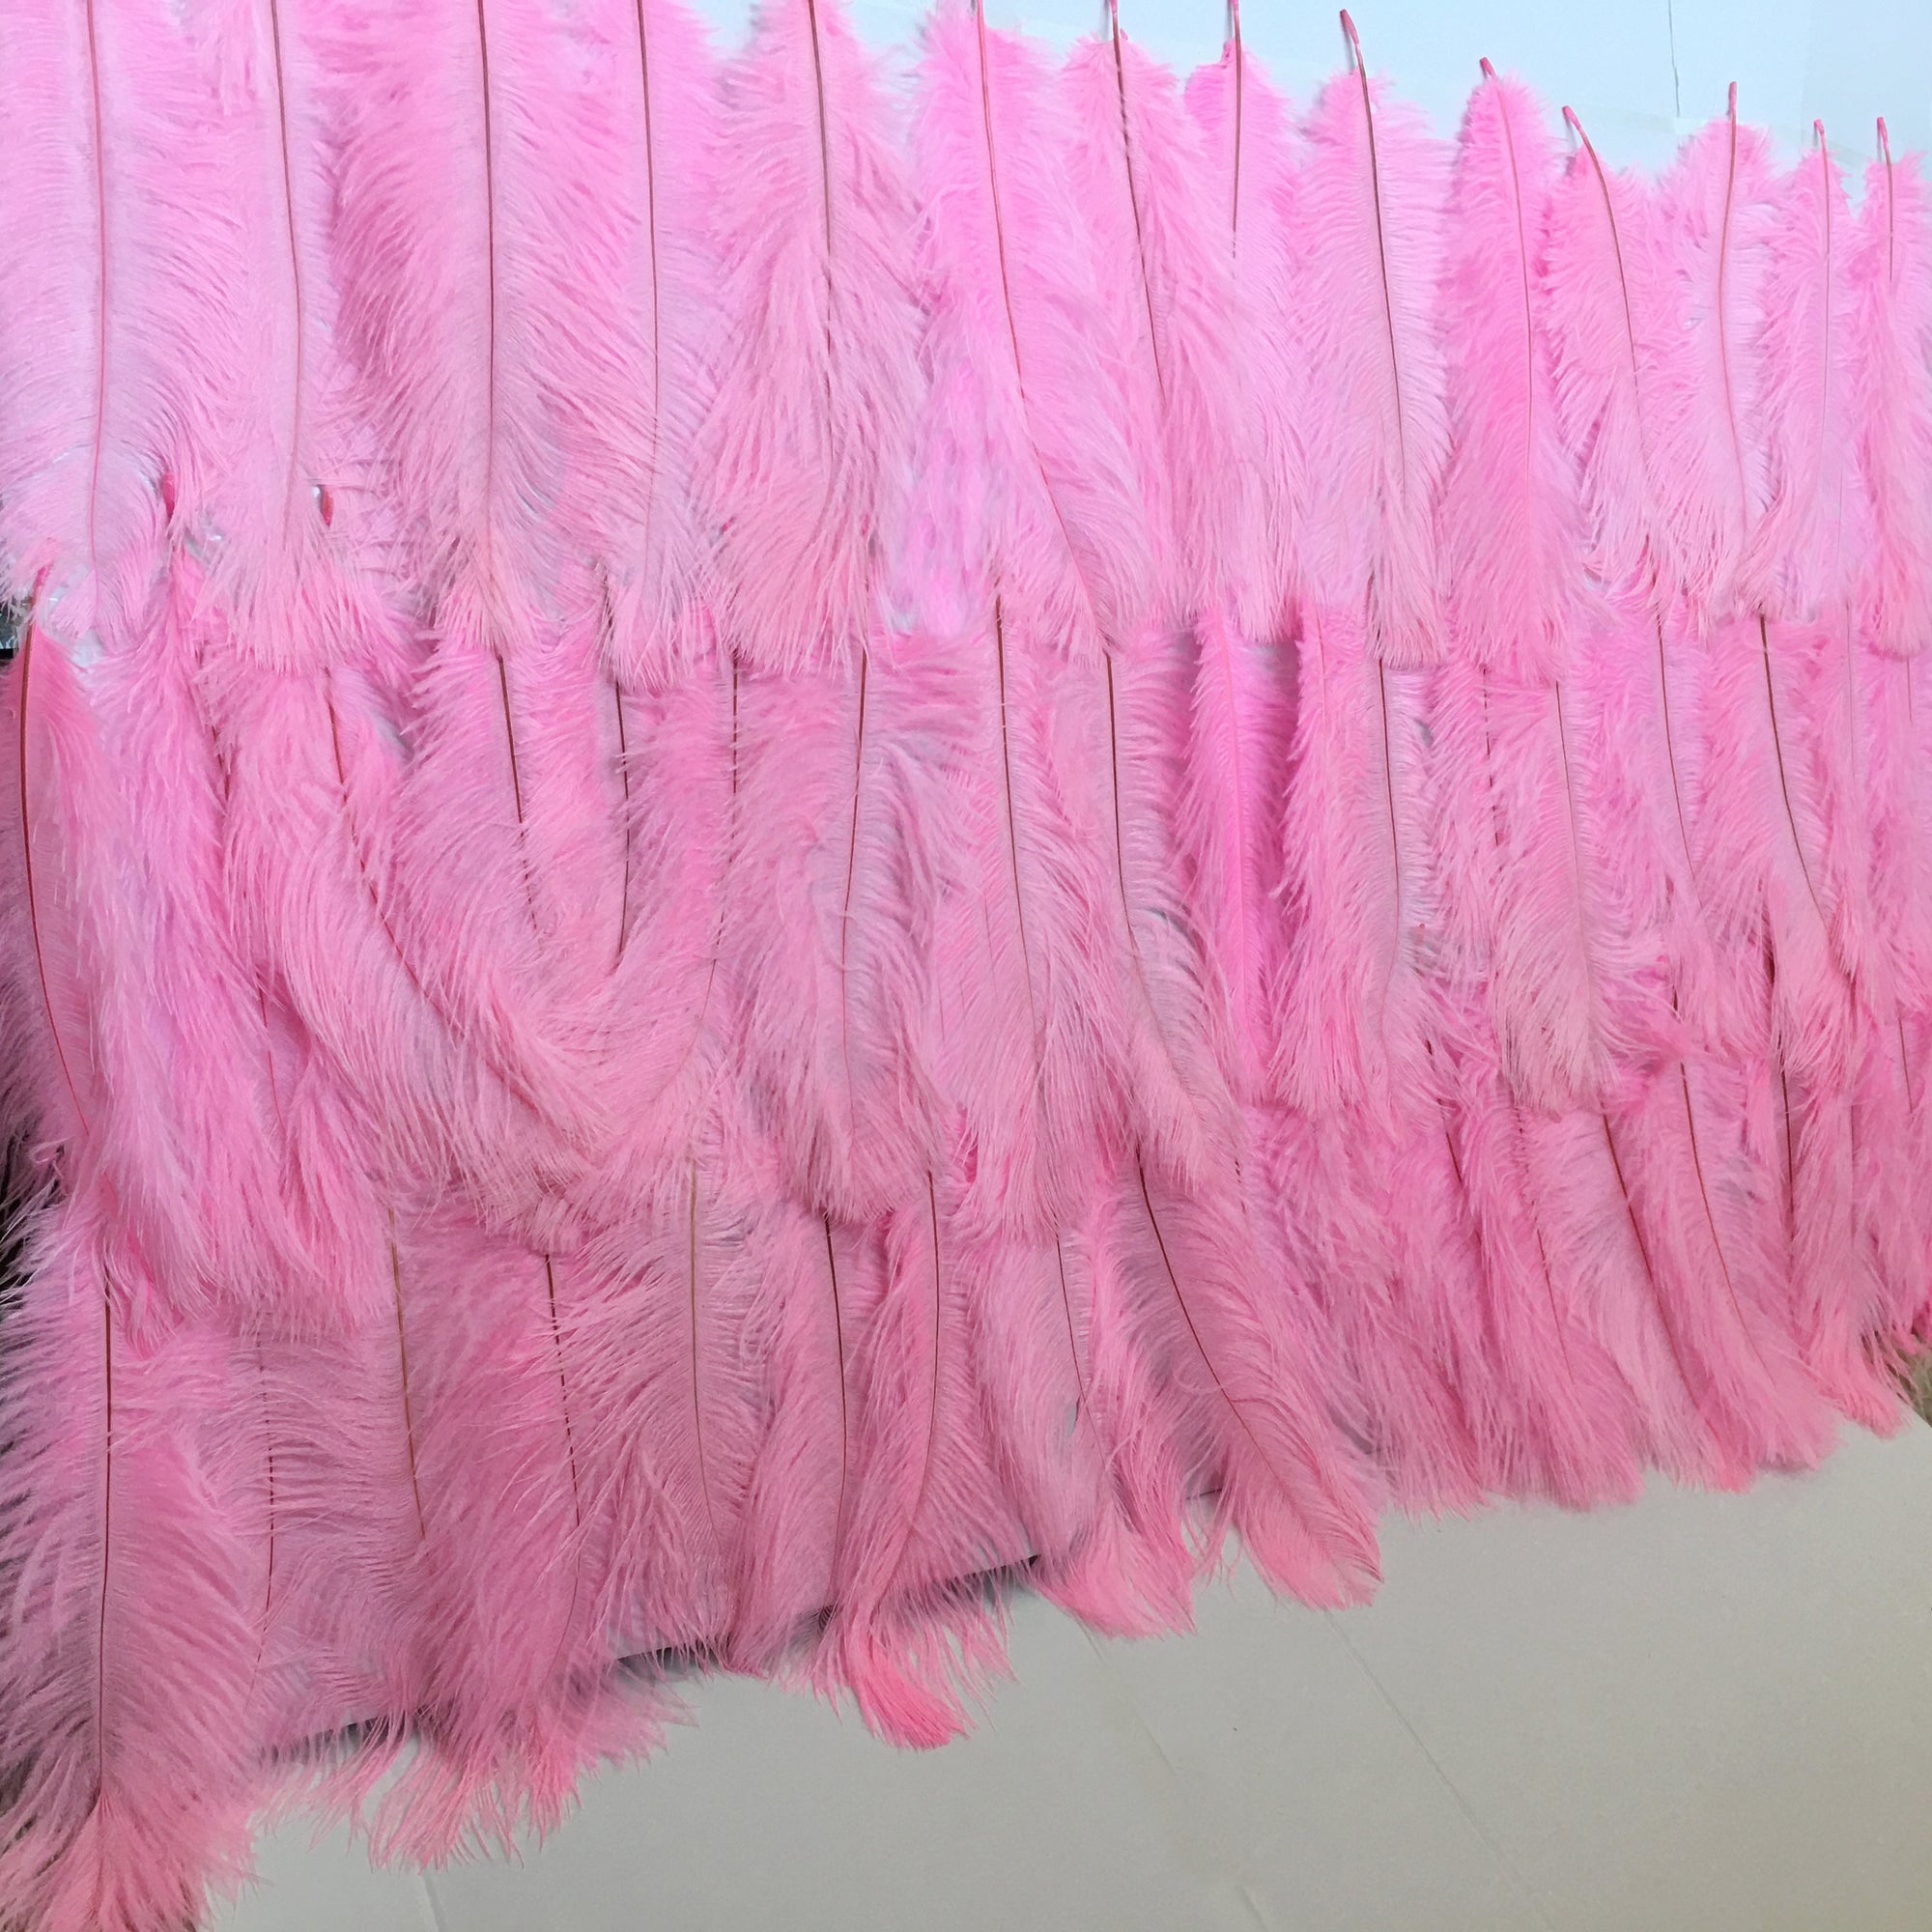 DIY298 : pink ostrich Feathers for Backdrop decor - Nirvanafourteen